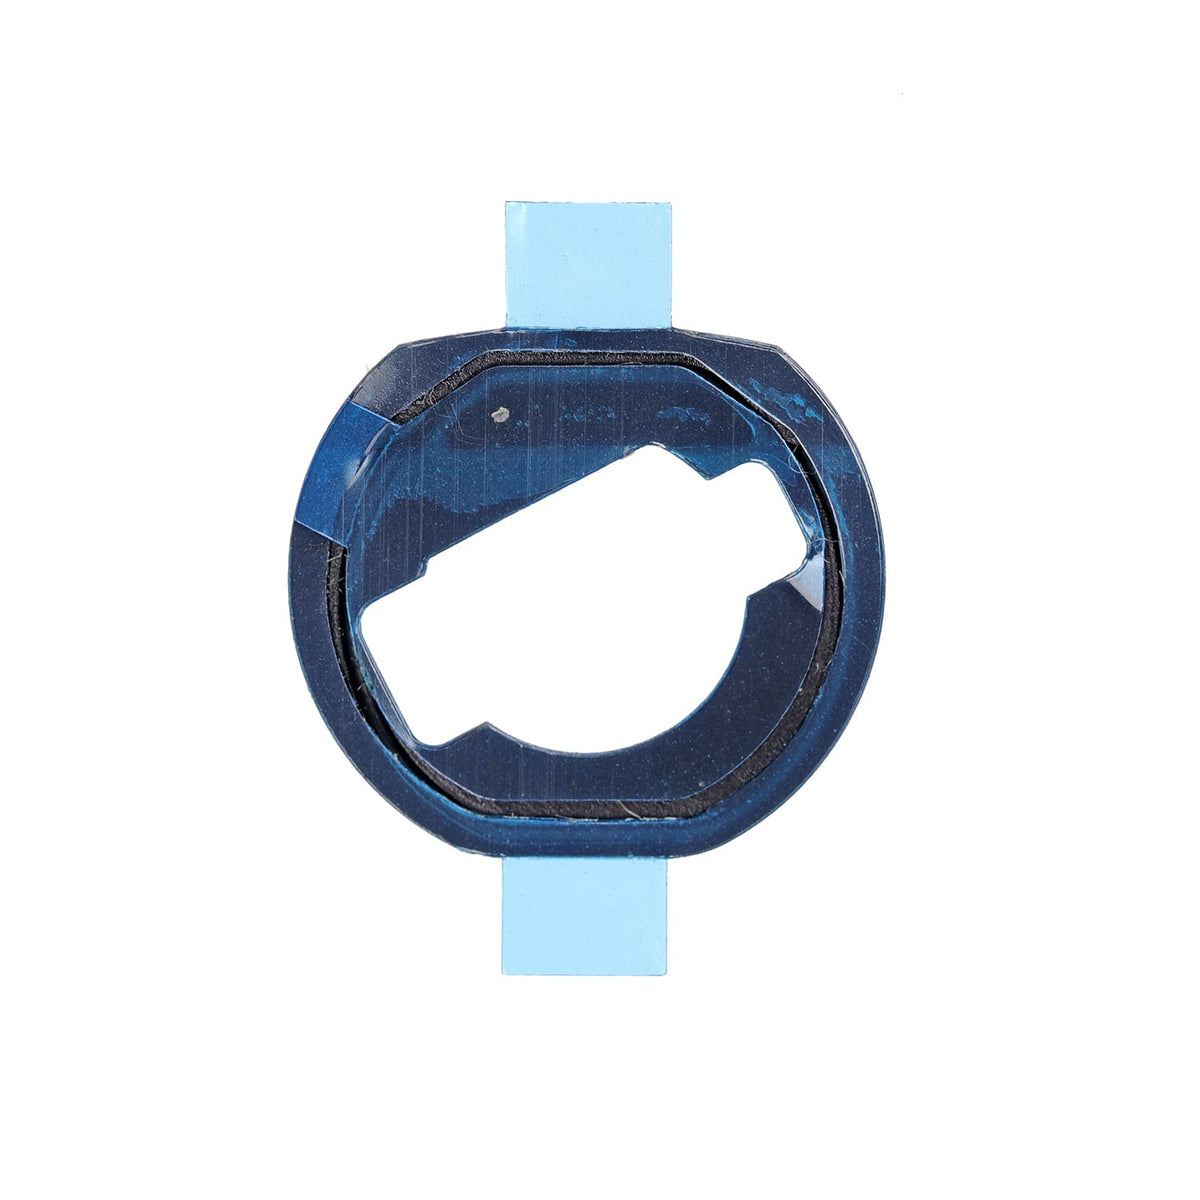 HOME BUTTON RUBBER GASKET FOR IPAD PRO 12.9" 2ND GEN